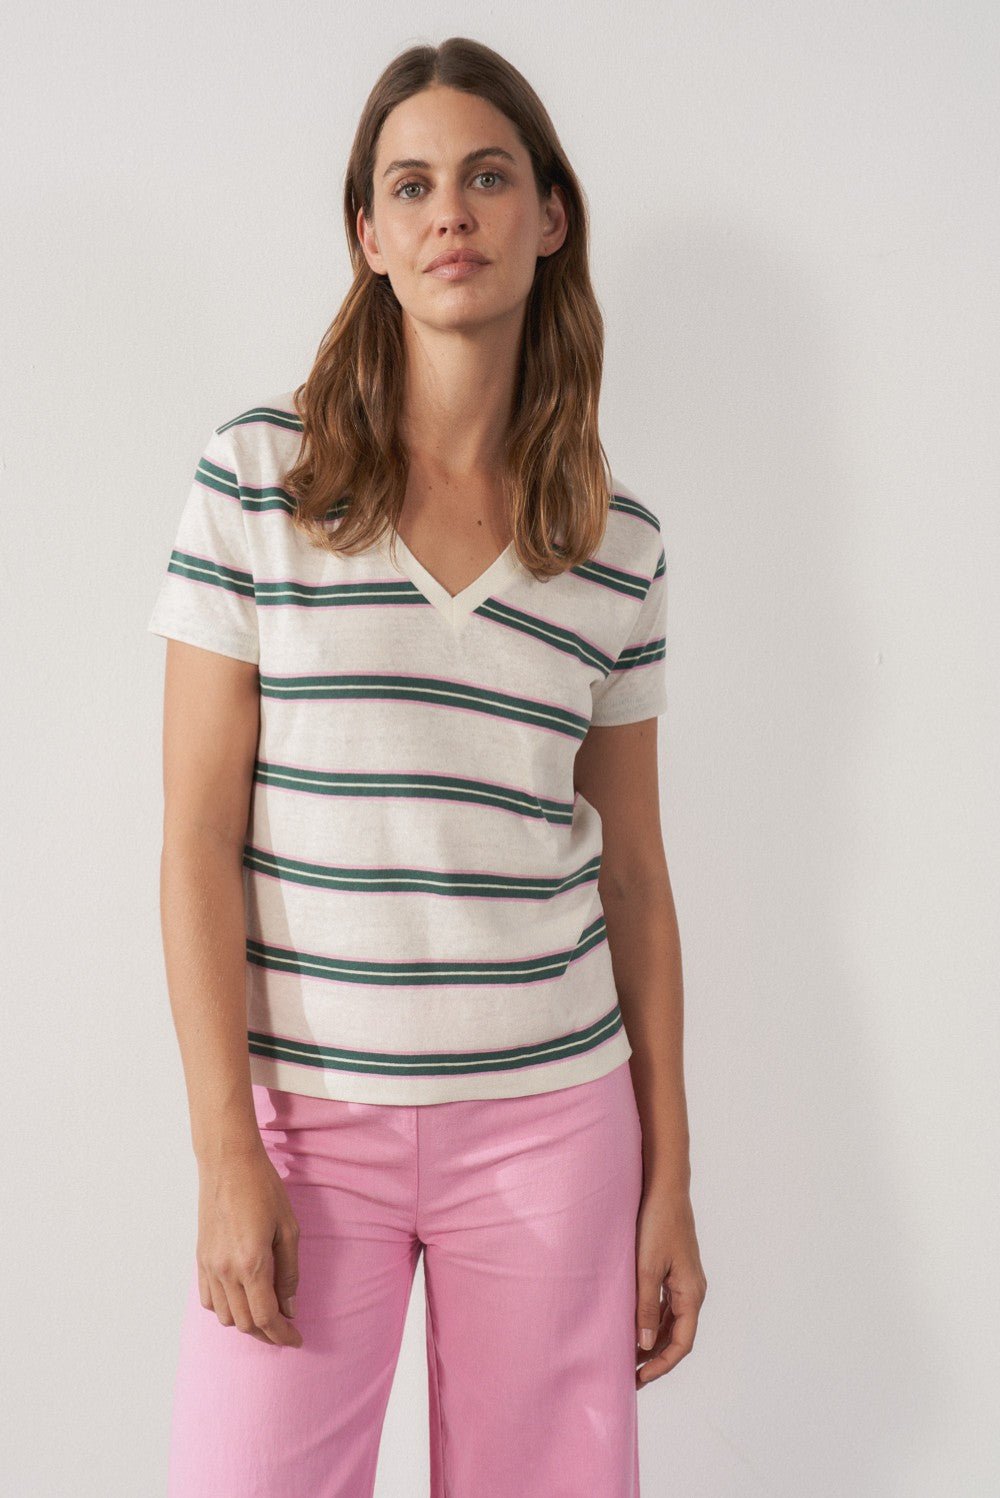 Sita Murt - Striped S/S VNeck Tee: Pink/Green - Shorely Chic Boutique